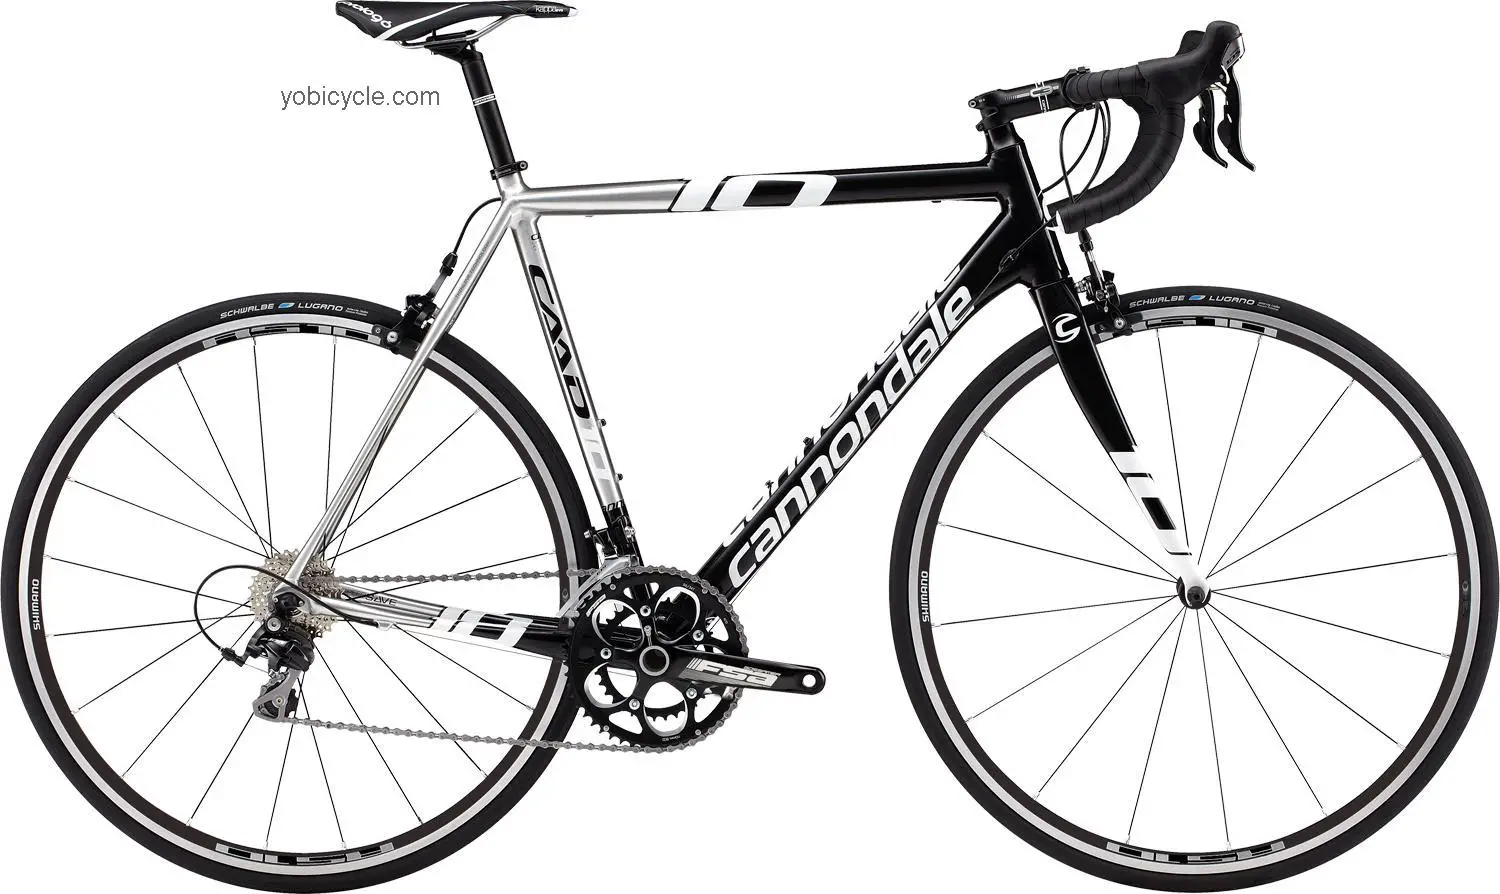 Cannondale CAAD10 5 105 2013 comparison online with competitors